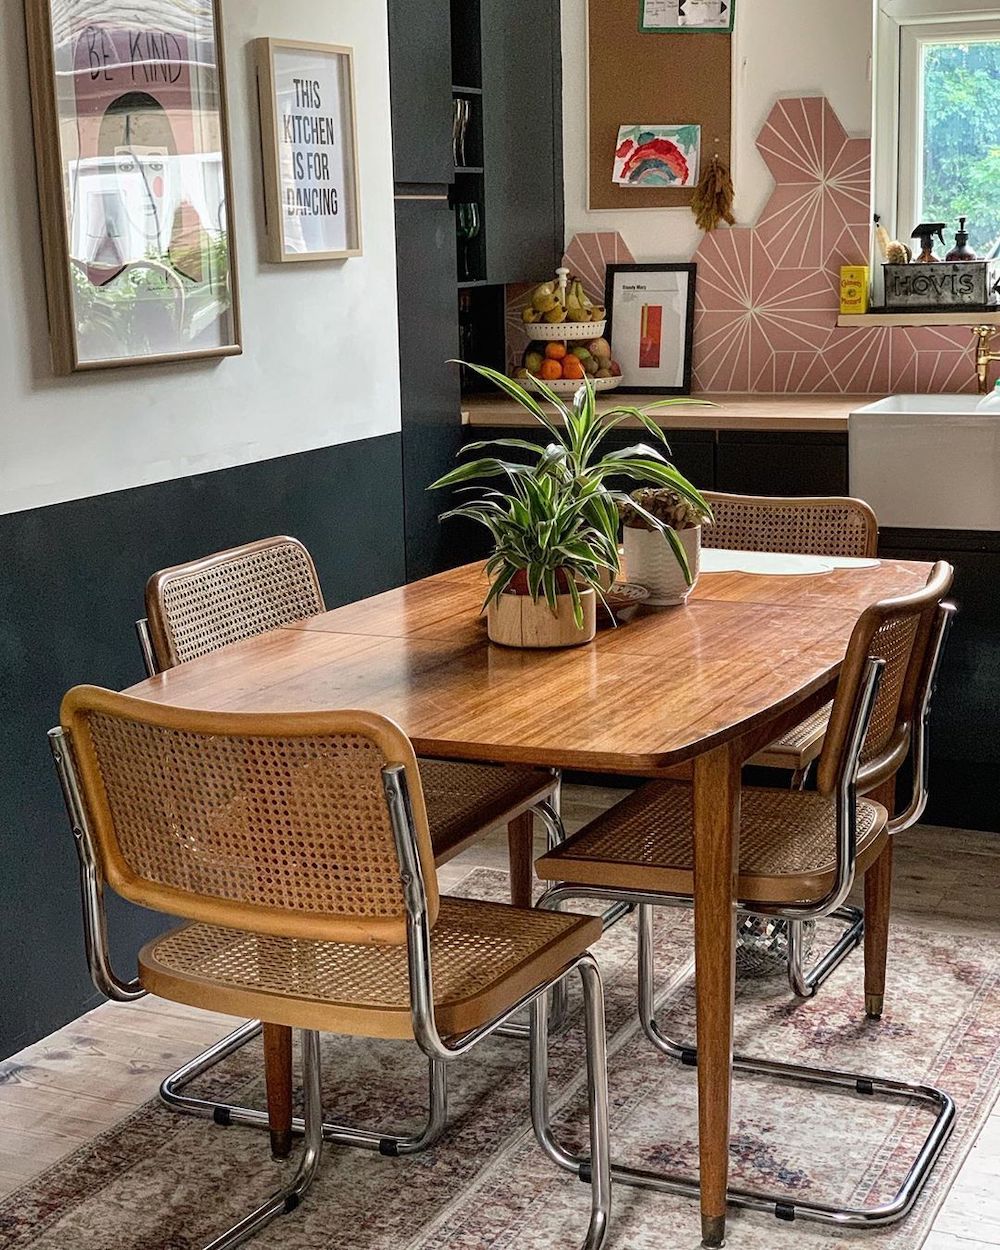 Bohemian Dining Room with Mid-Century Chairs and House Plants via @at_home_at_170